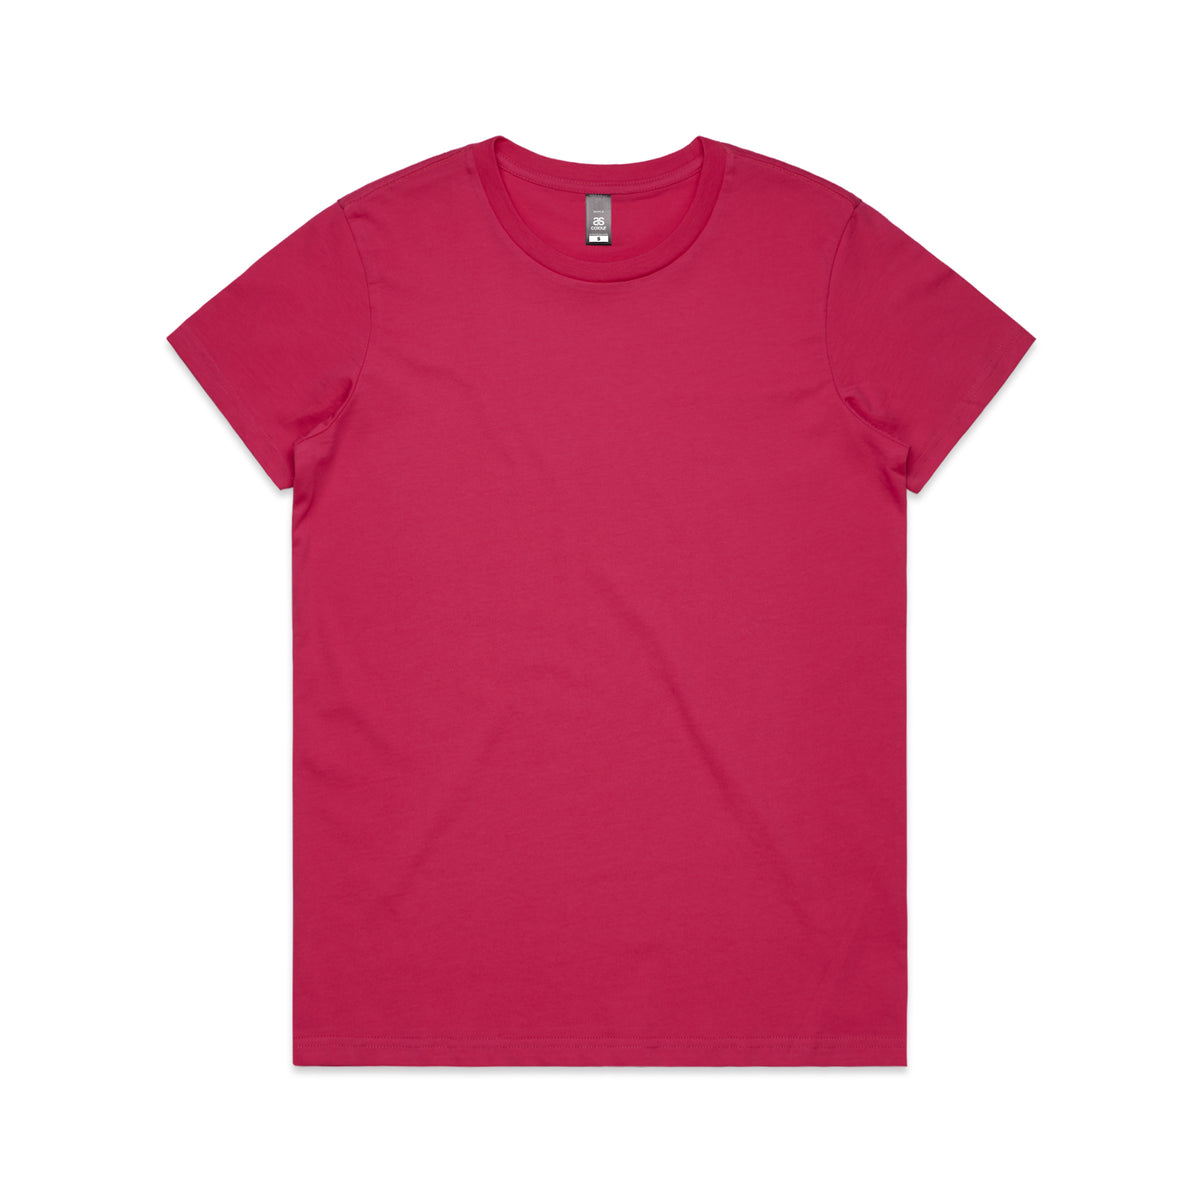 The Maple Tee — The Maple